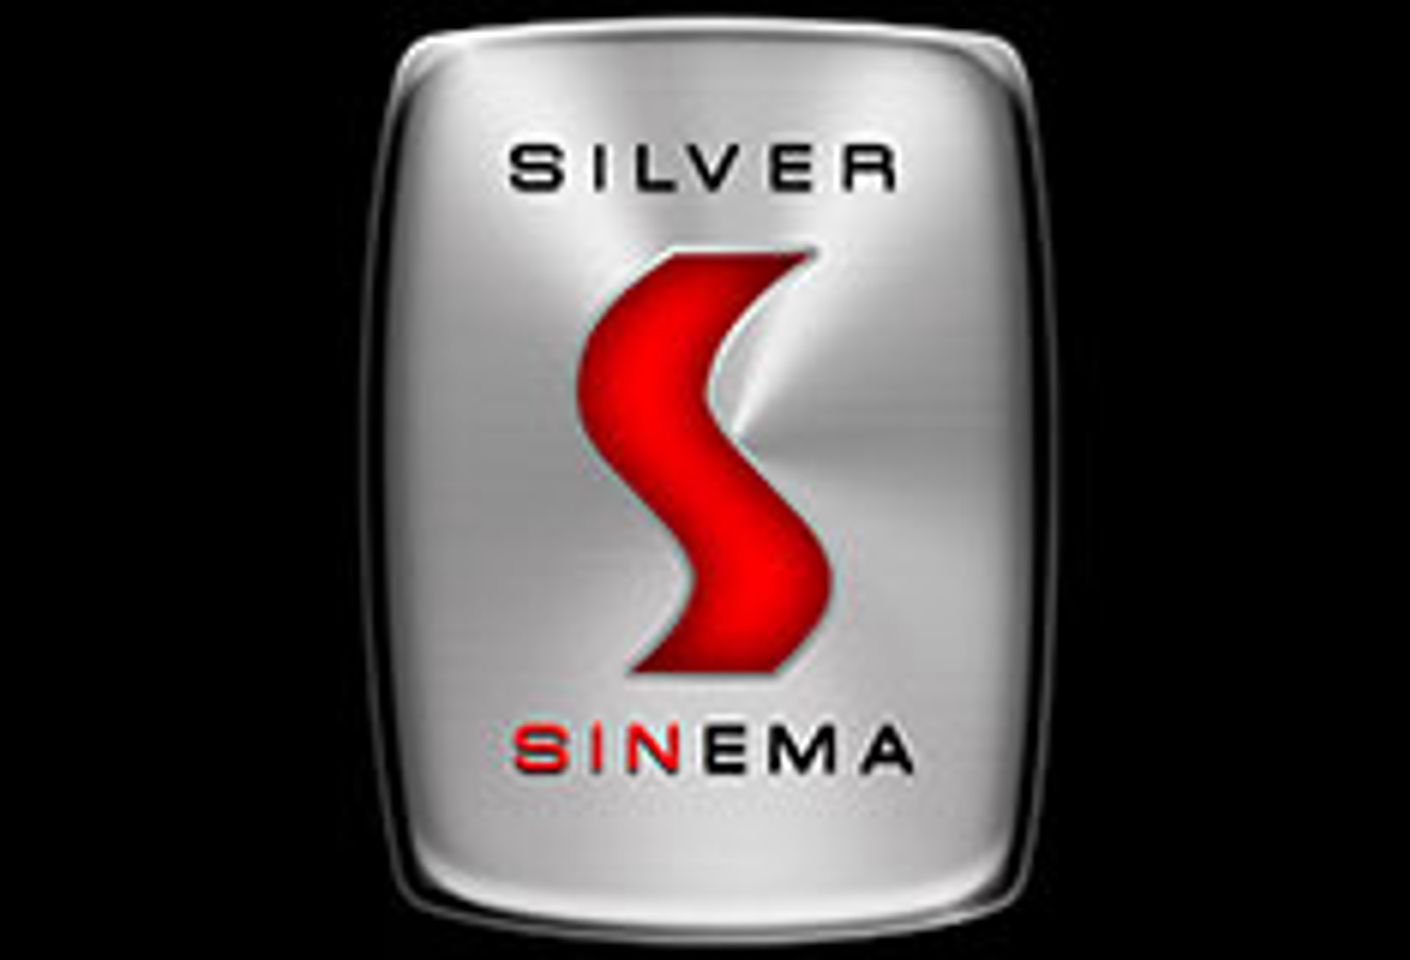 SilverCash and Pure Play Media Launch Silver Sinema DVD Line